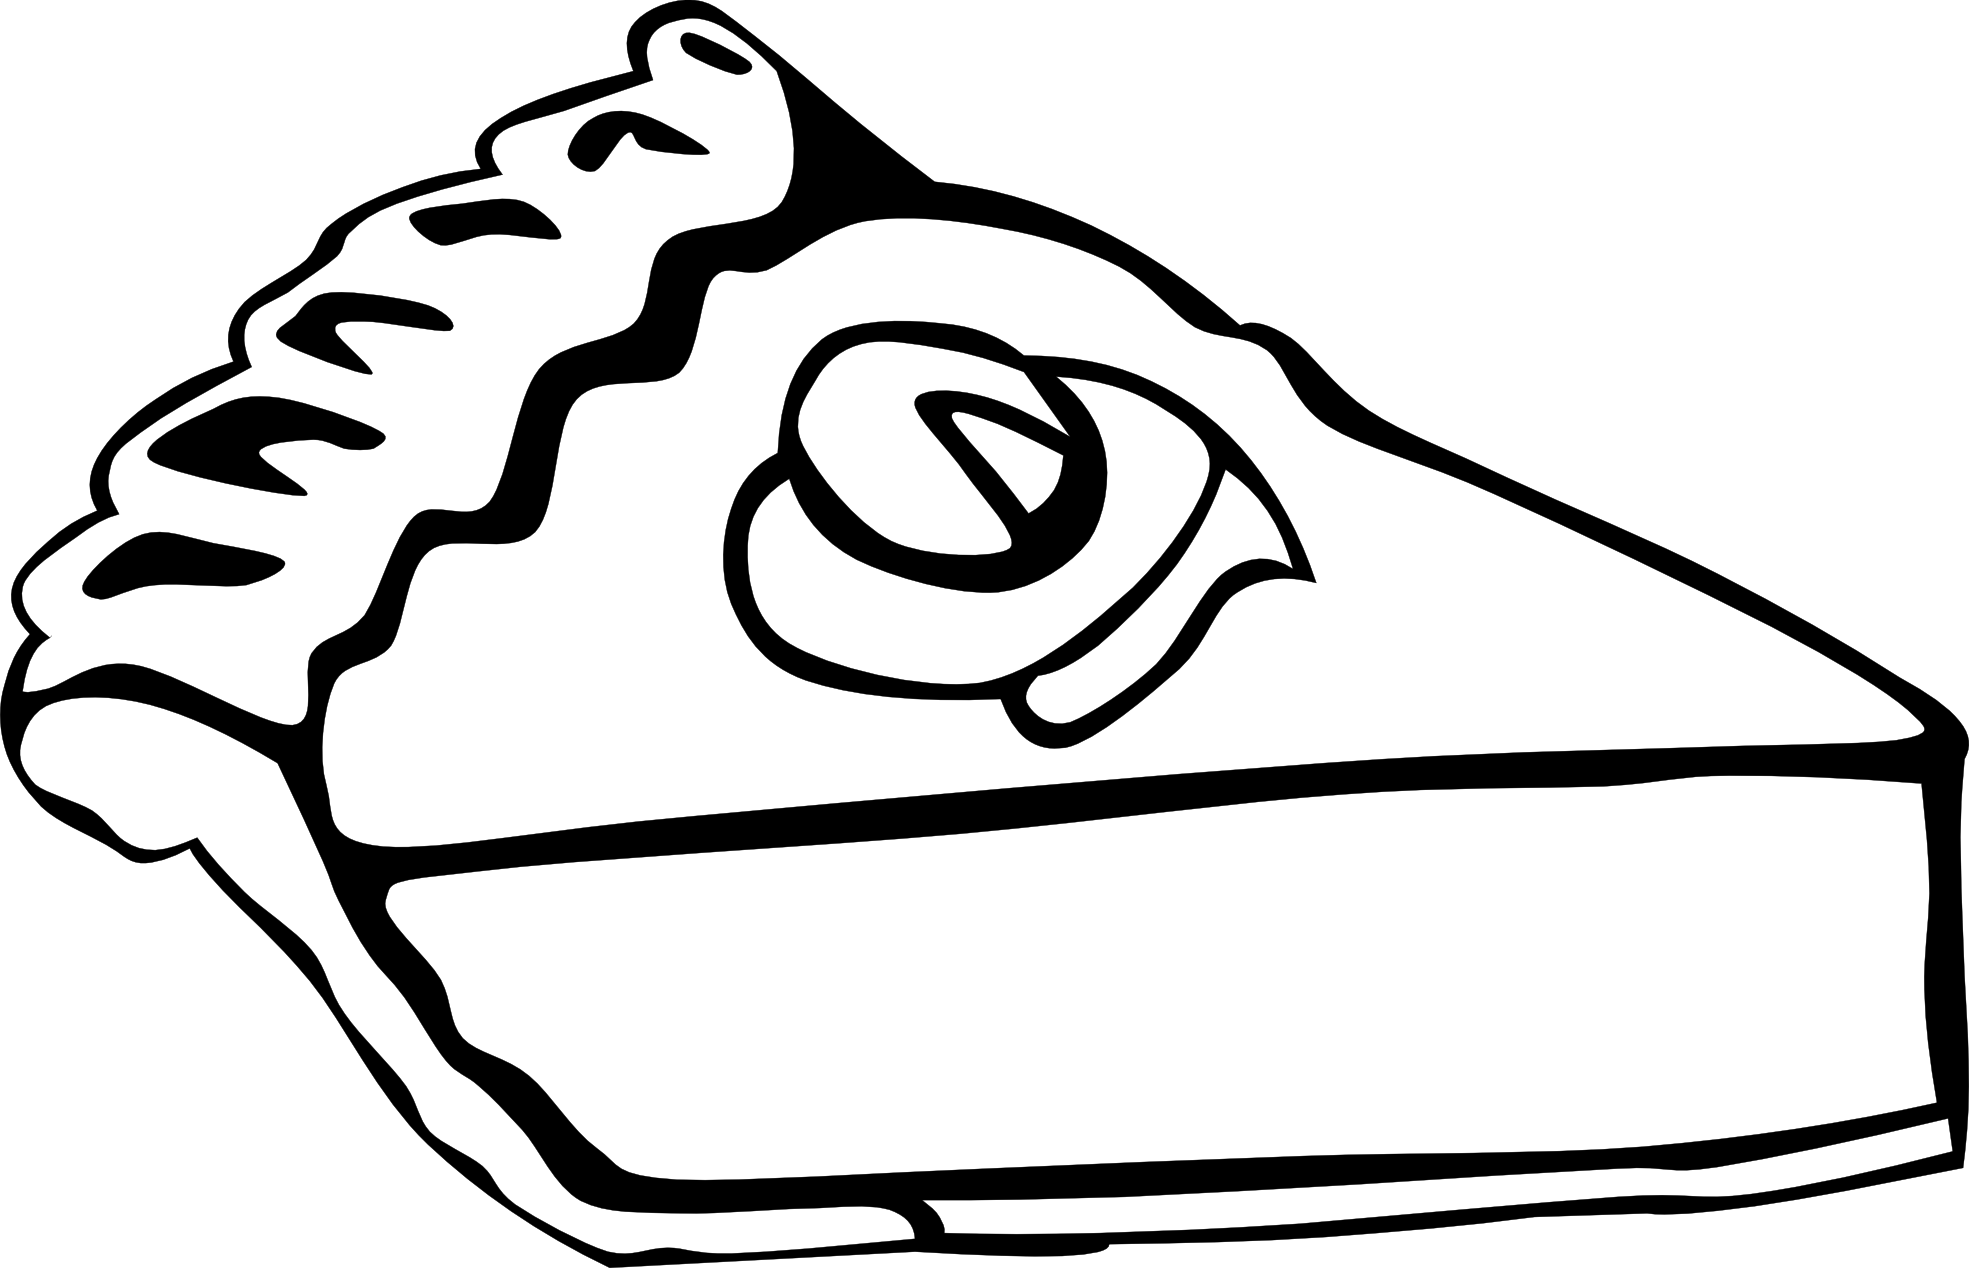  collection of bread. Clipart turkey nose